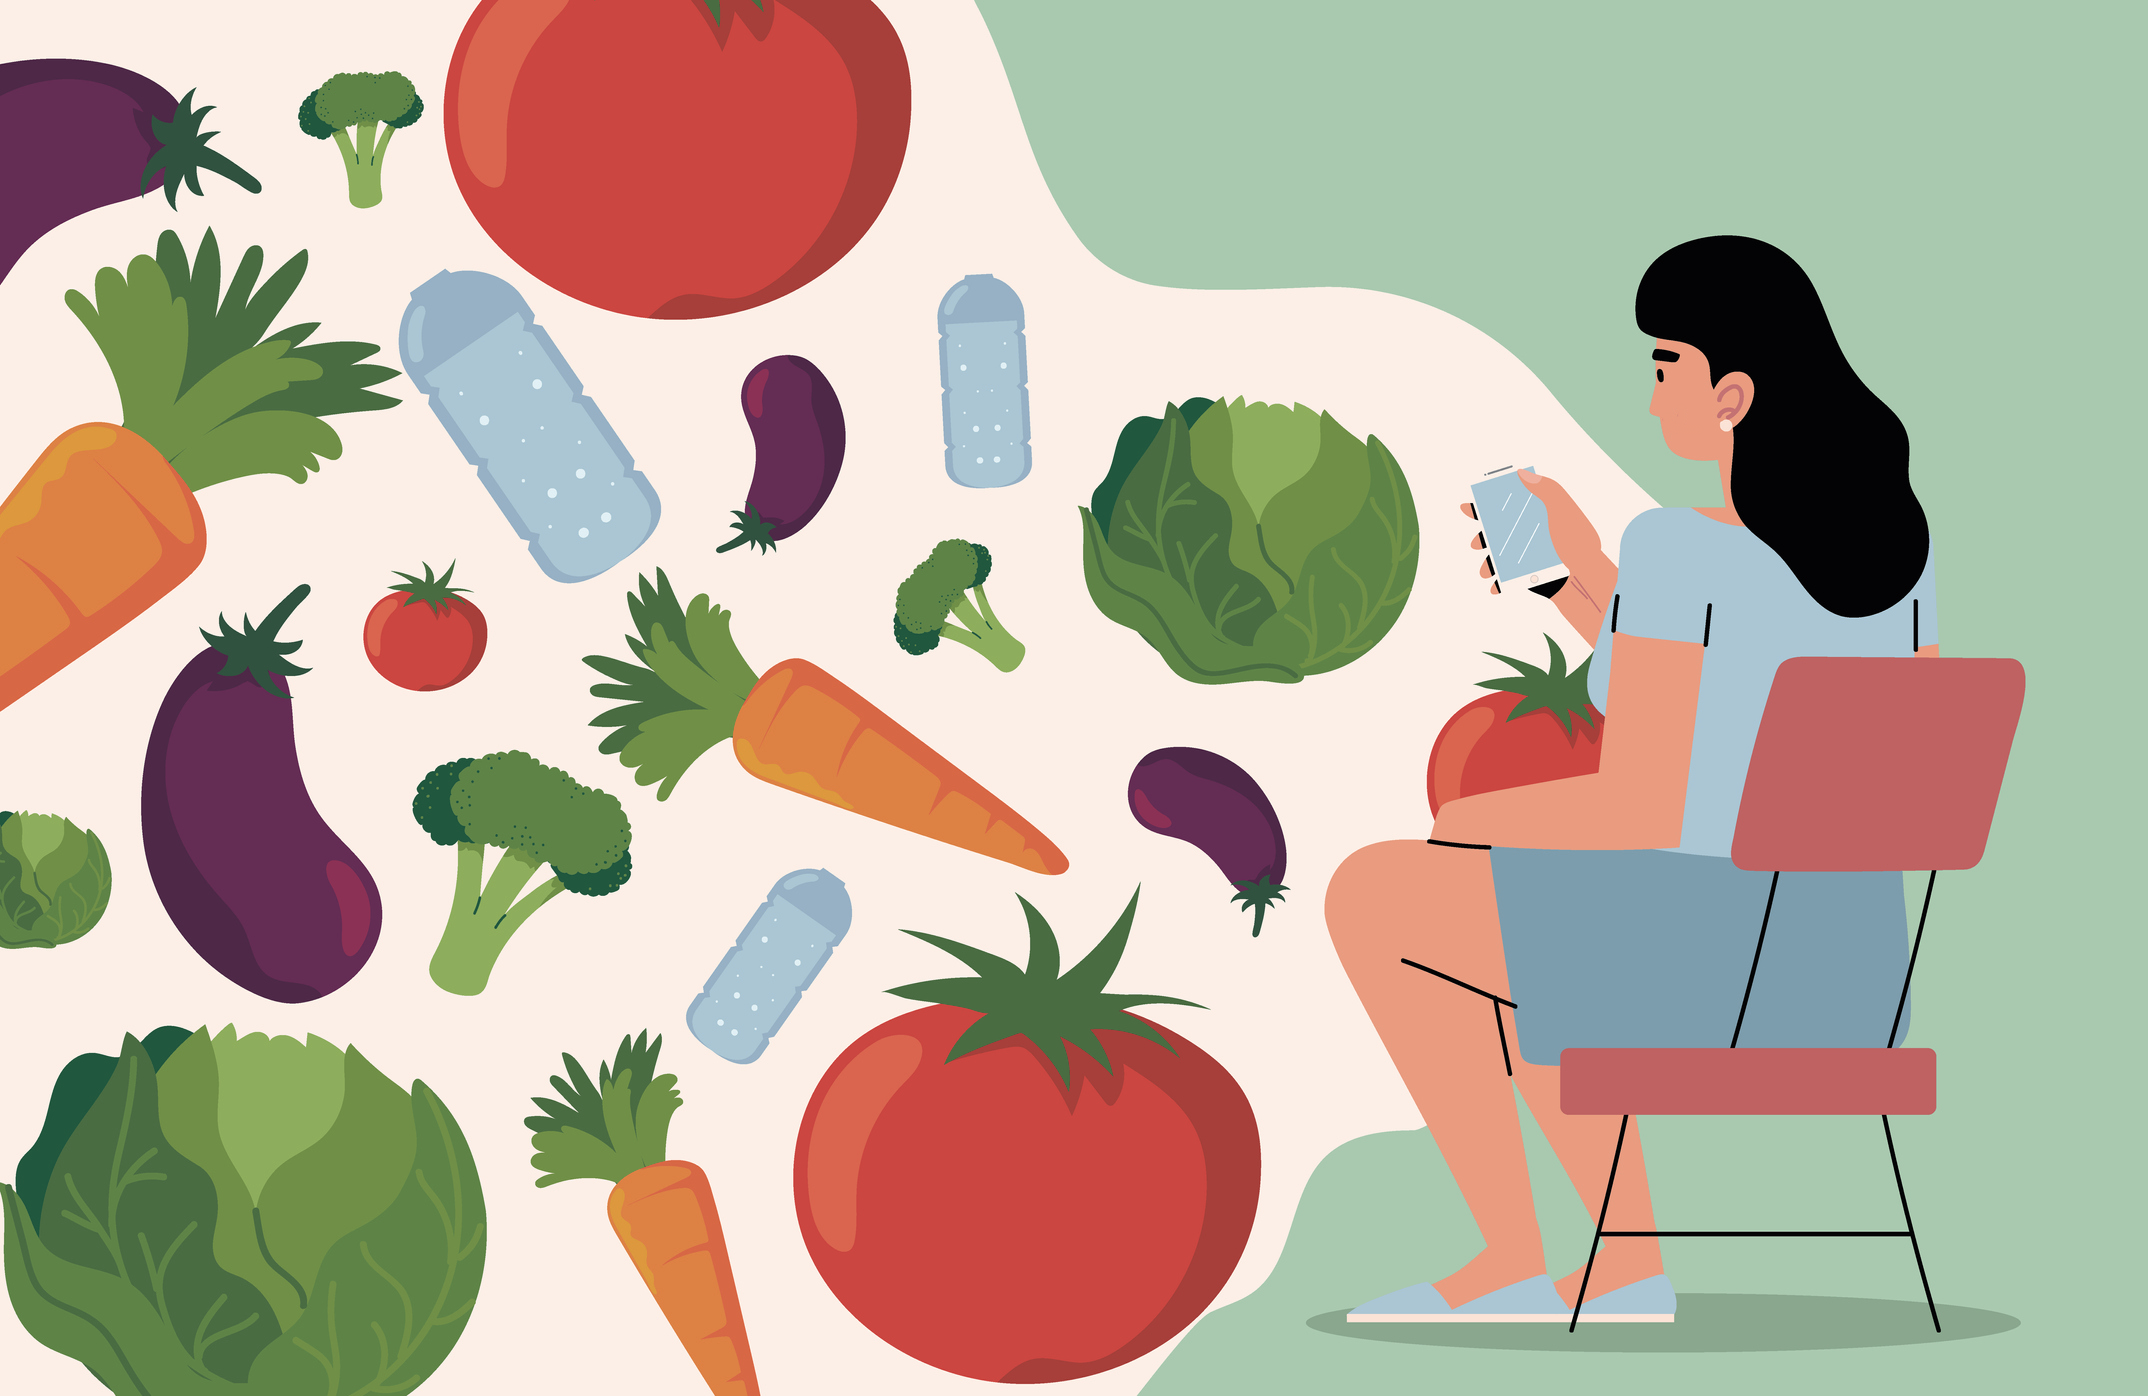 An illustration of a woman sitting with her phone in her hand and contemplating a cloud of huge vegetables.